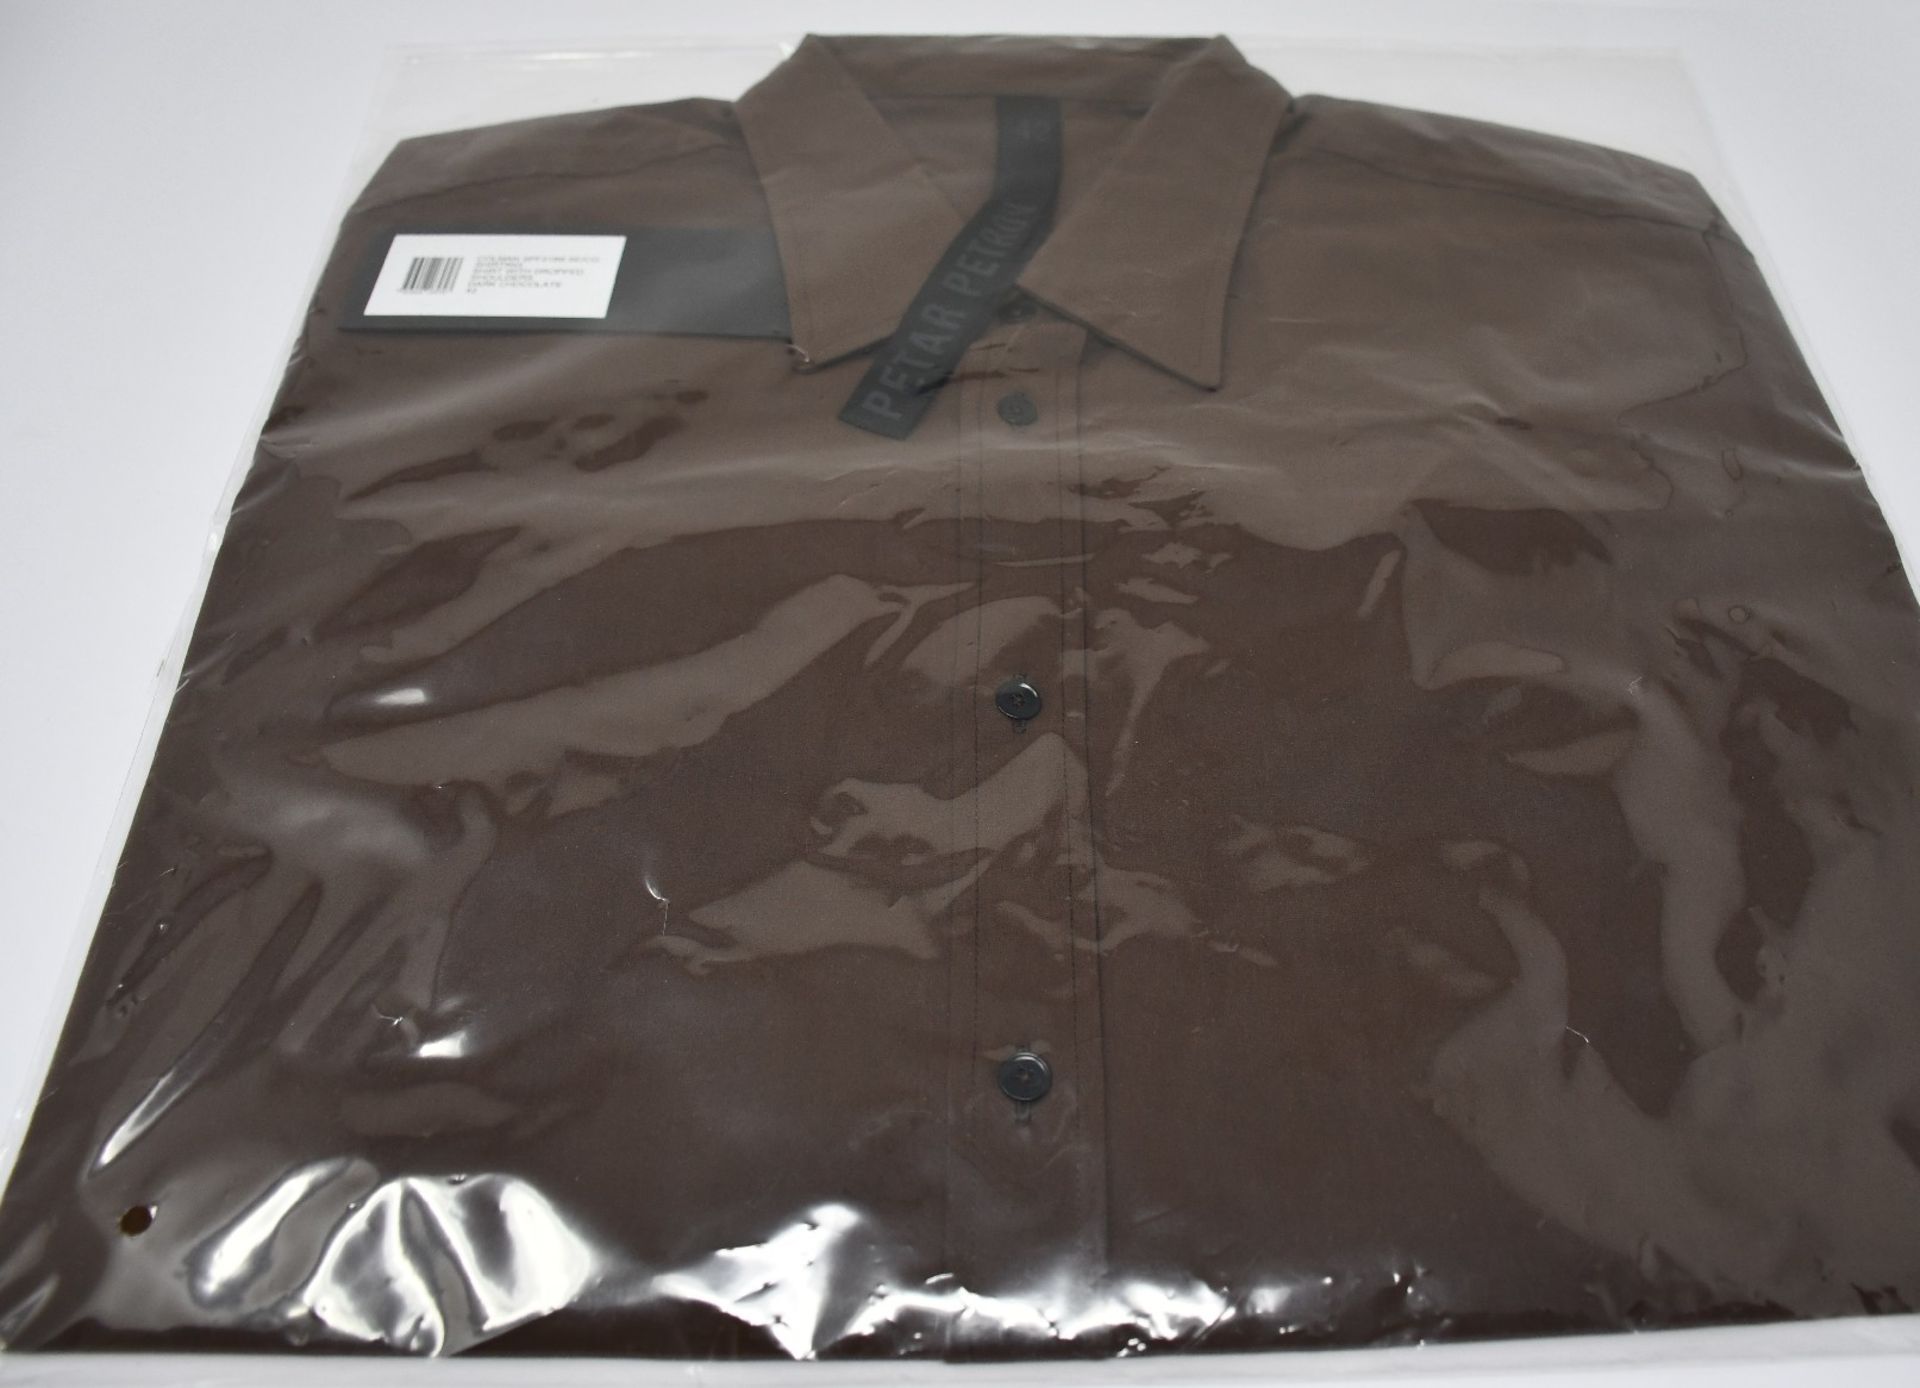 An as new Petar Petrov Colman shirt with dropped shoulders in dark chocolate (EU 34 - RRP £770).